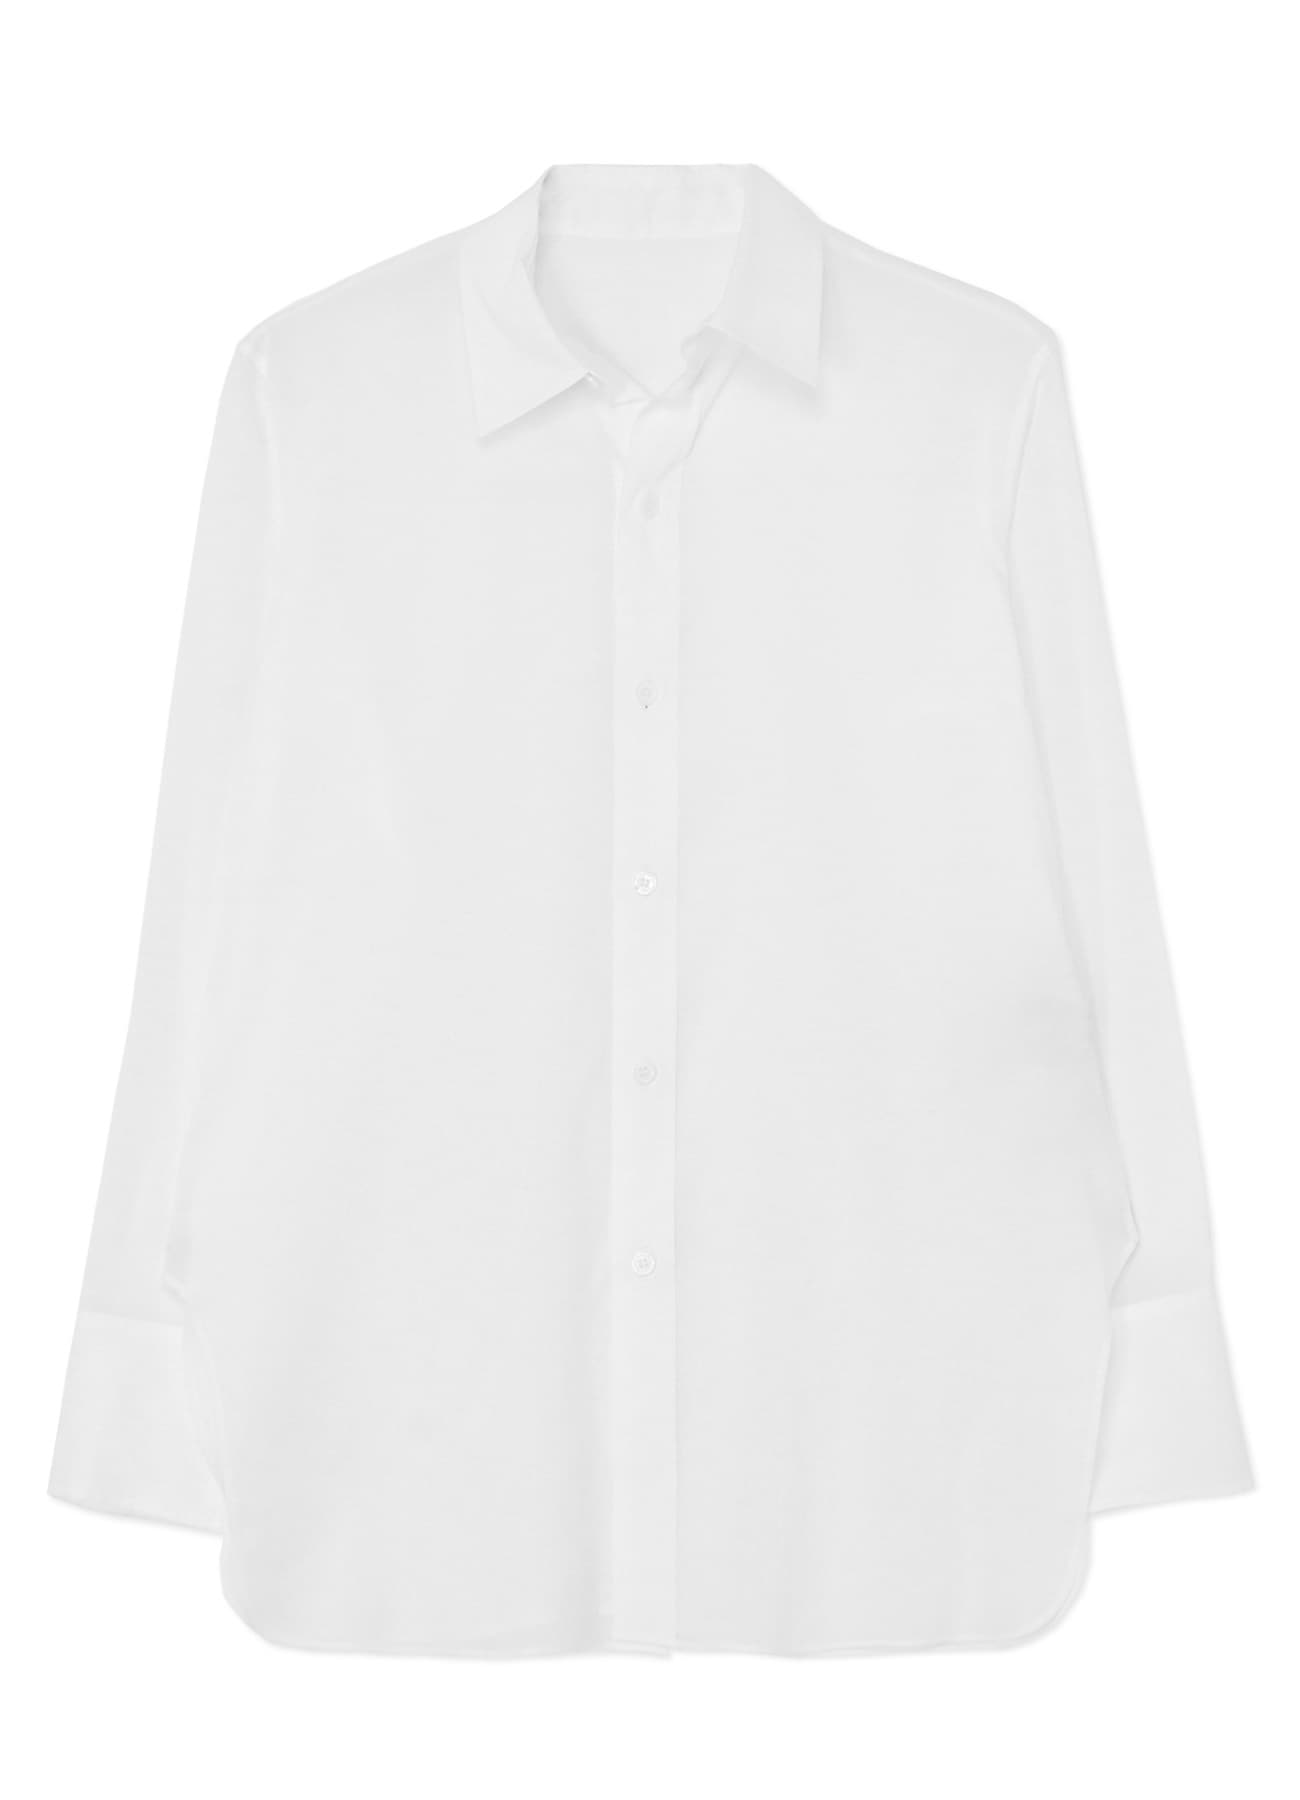 CELLULOSE LAWN CLASSIC SHIRT